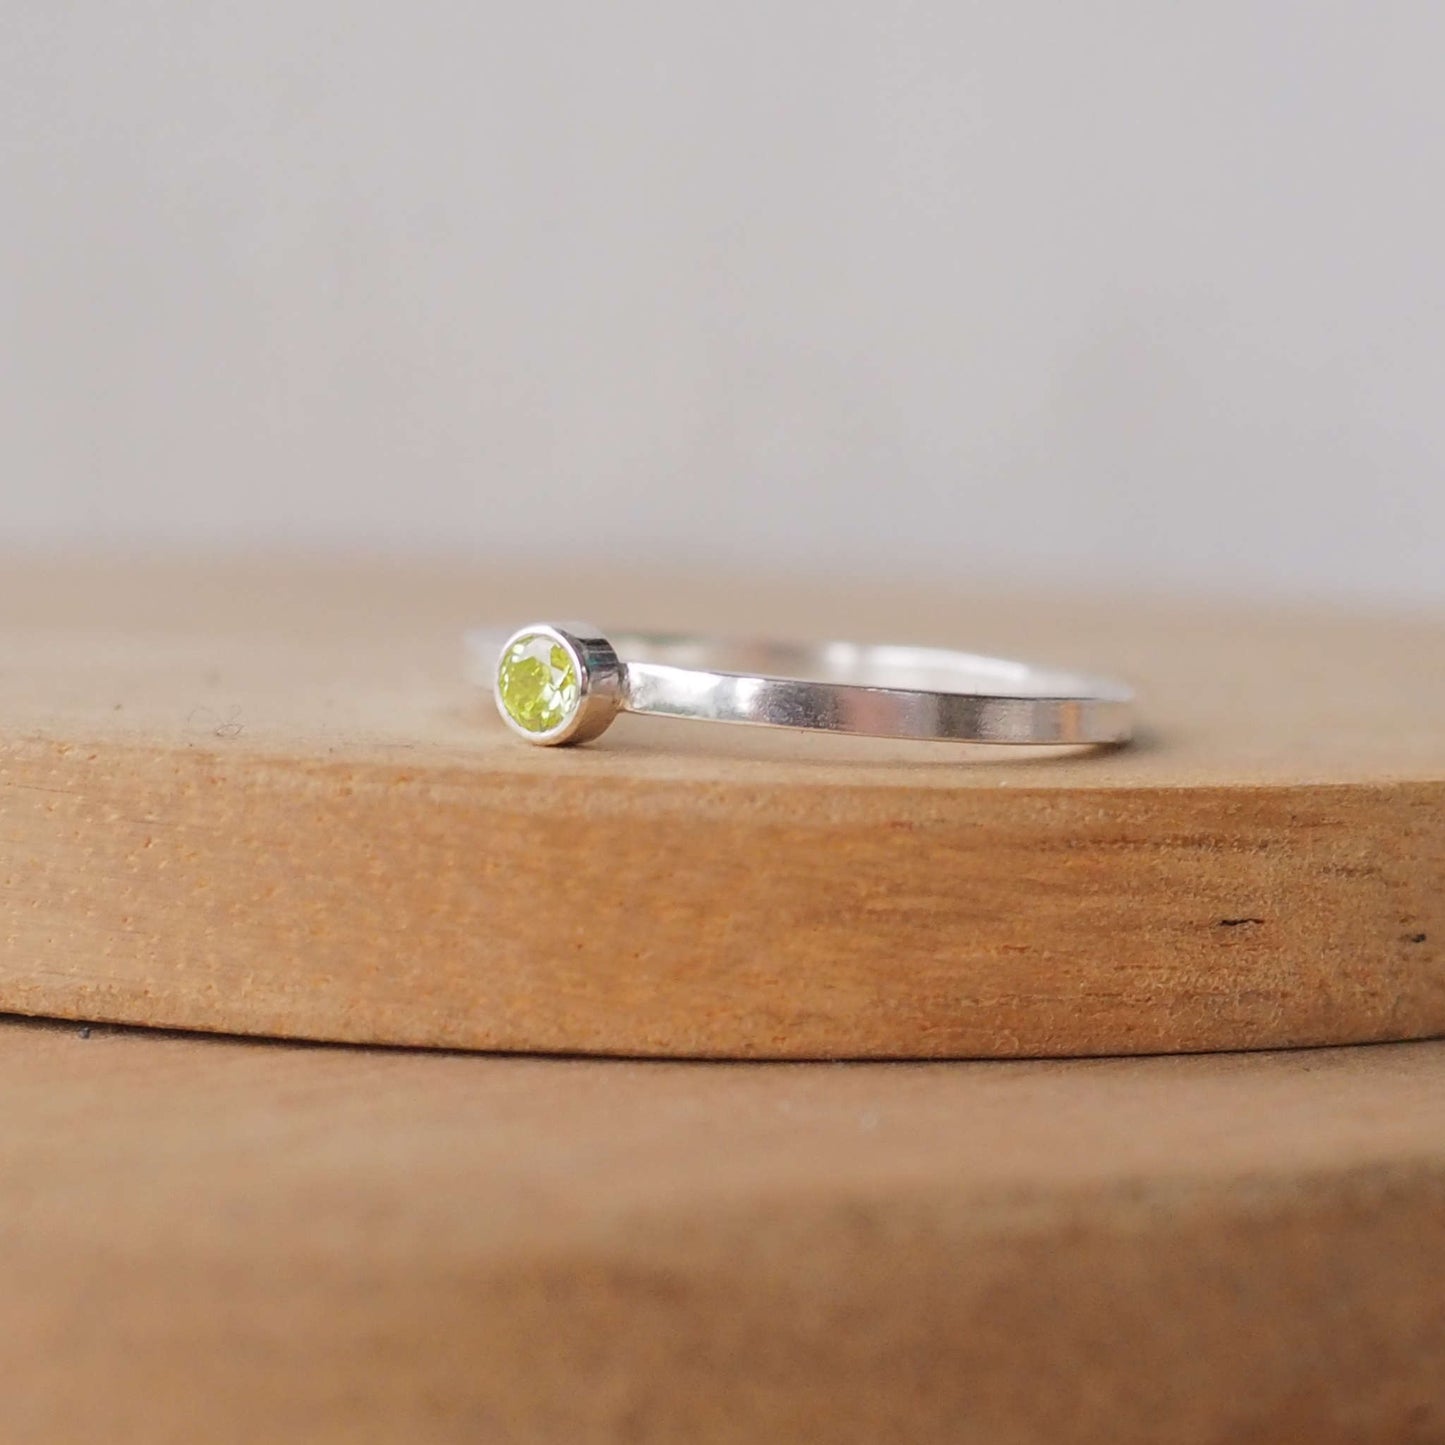 Peridot solitaire ring in a modern style with a simple square band, The ring is made from Sterling Silver and mossy green Cubic zirconia with a 4mm round gemstone fully enclosed in a silver setting. Handmade by maram jewellery in Edinburgh